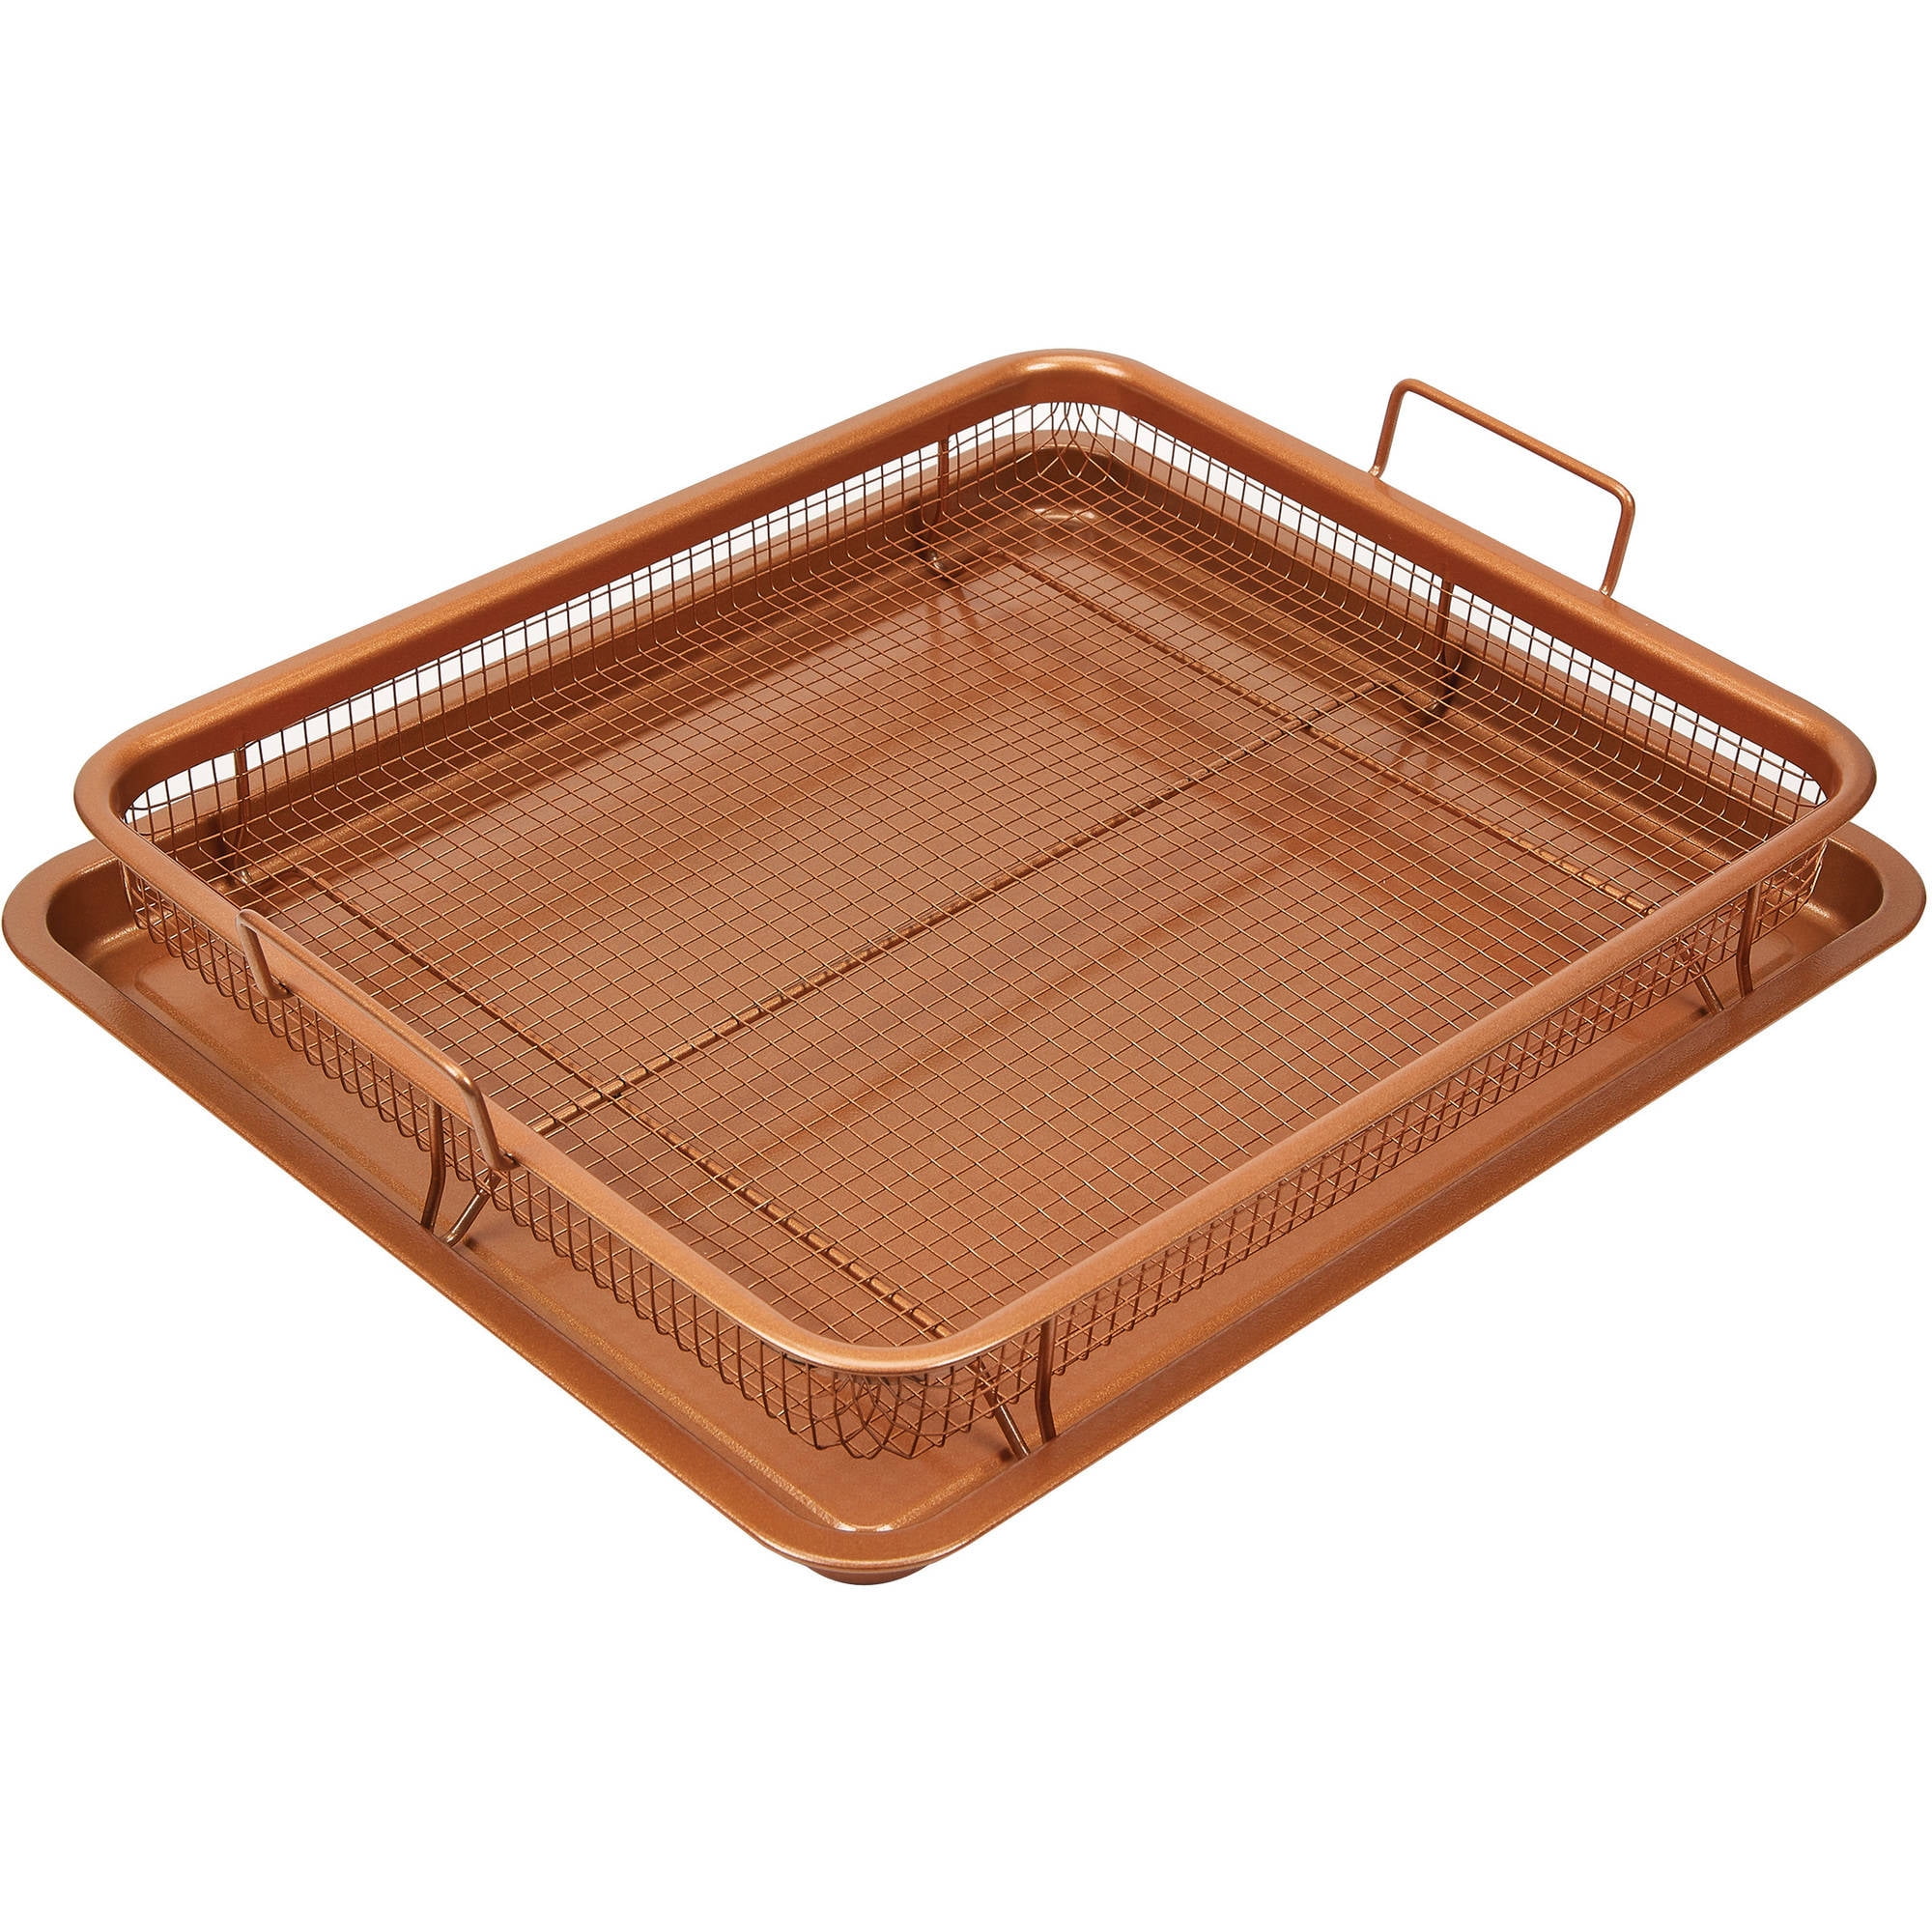 Deluxe Copper Crisper - 2-Pieces Nonstick Oven Air Fryer Pan/Tray & Mesh  Basket Set - Air Fryer in Oven - Ideal for French Fry - Frozen Food, Baking